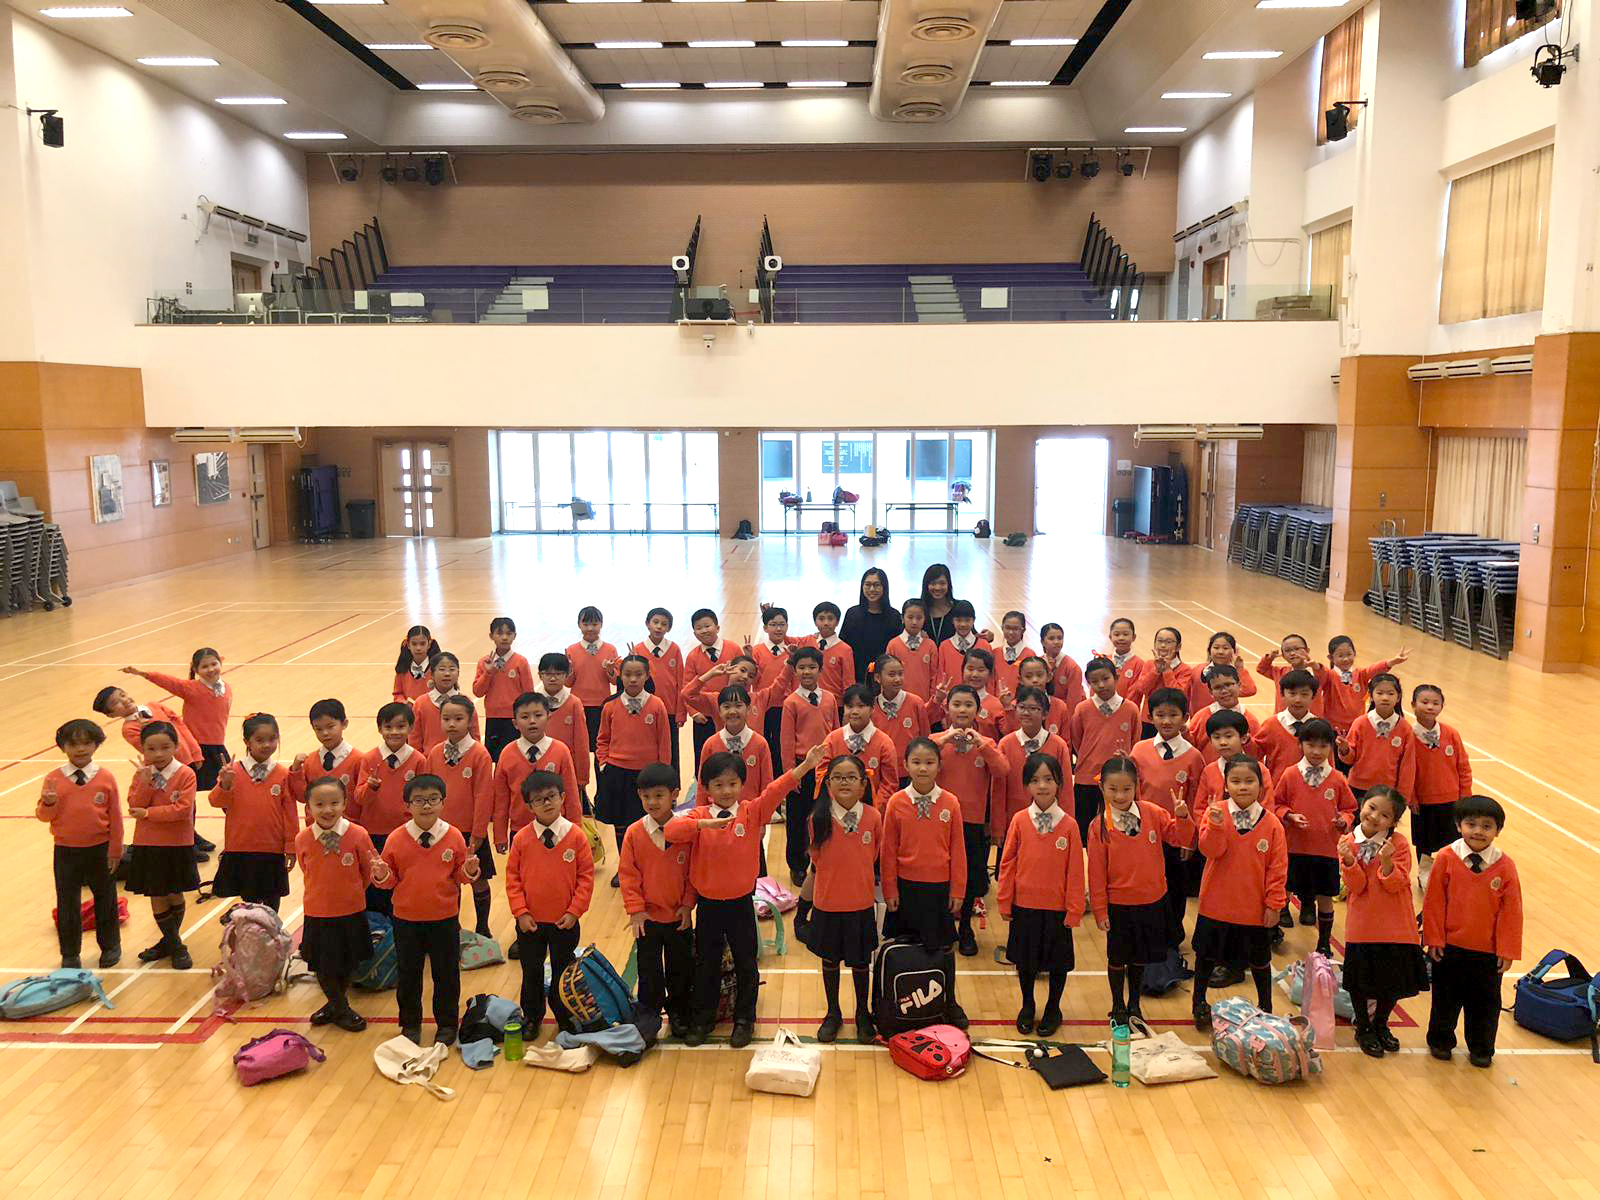 The Junior Choir also won the Third Place in the 71st Hong Kong Music Festival, Chinese Church Music (Age 9 or under).